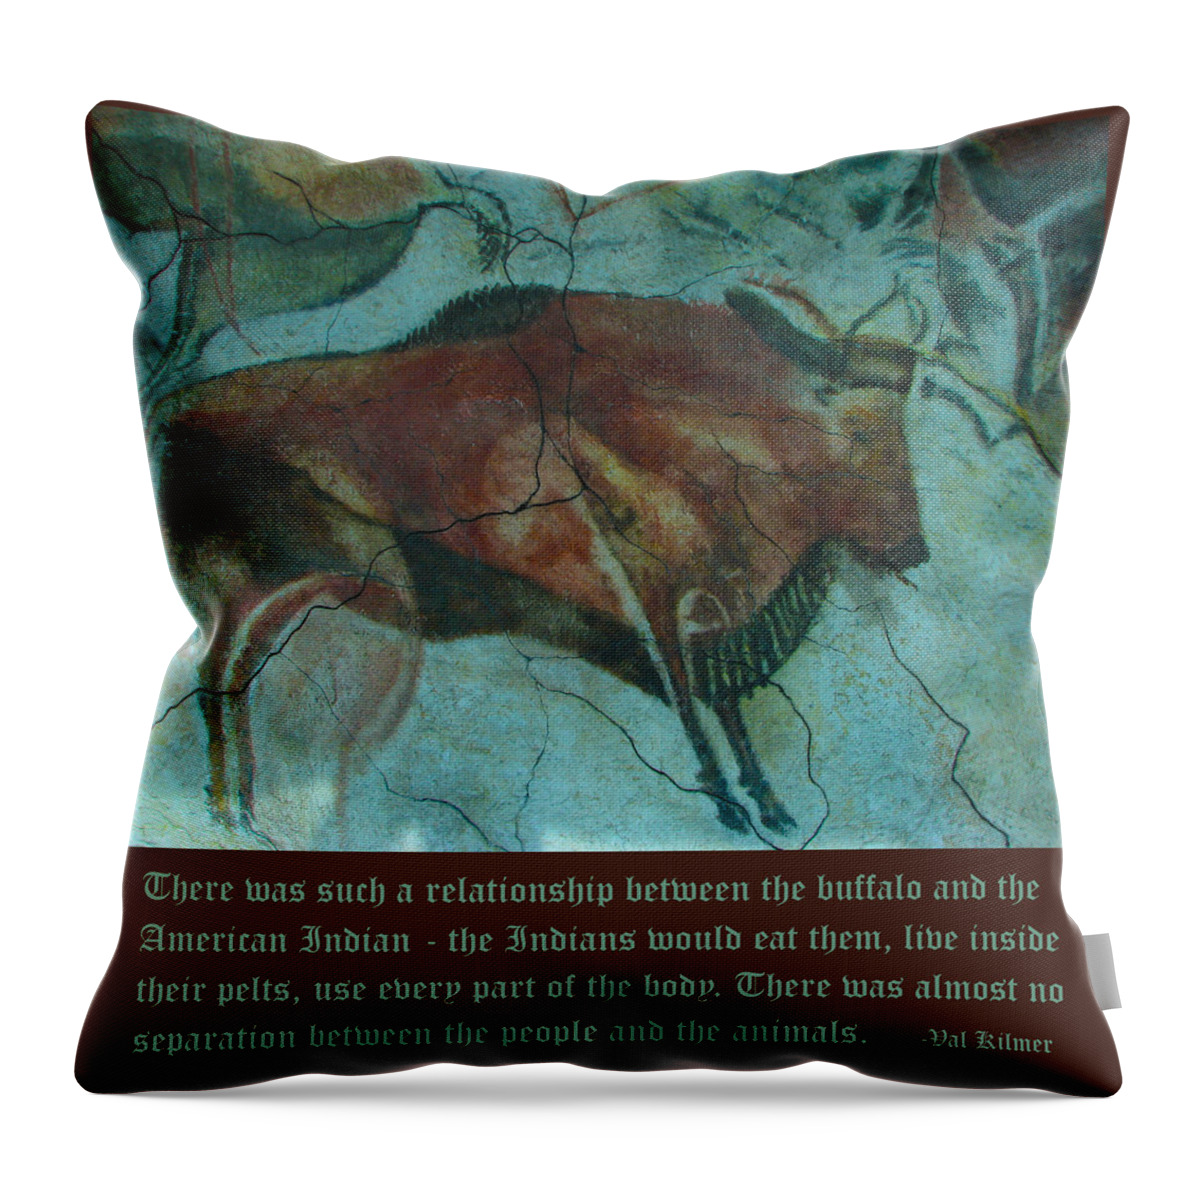 Val Kilmer On The Bison Throw Pillow featuring the digital art Val Kilmer On The Bison by Unknown